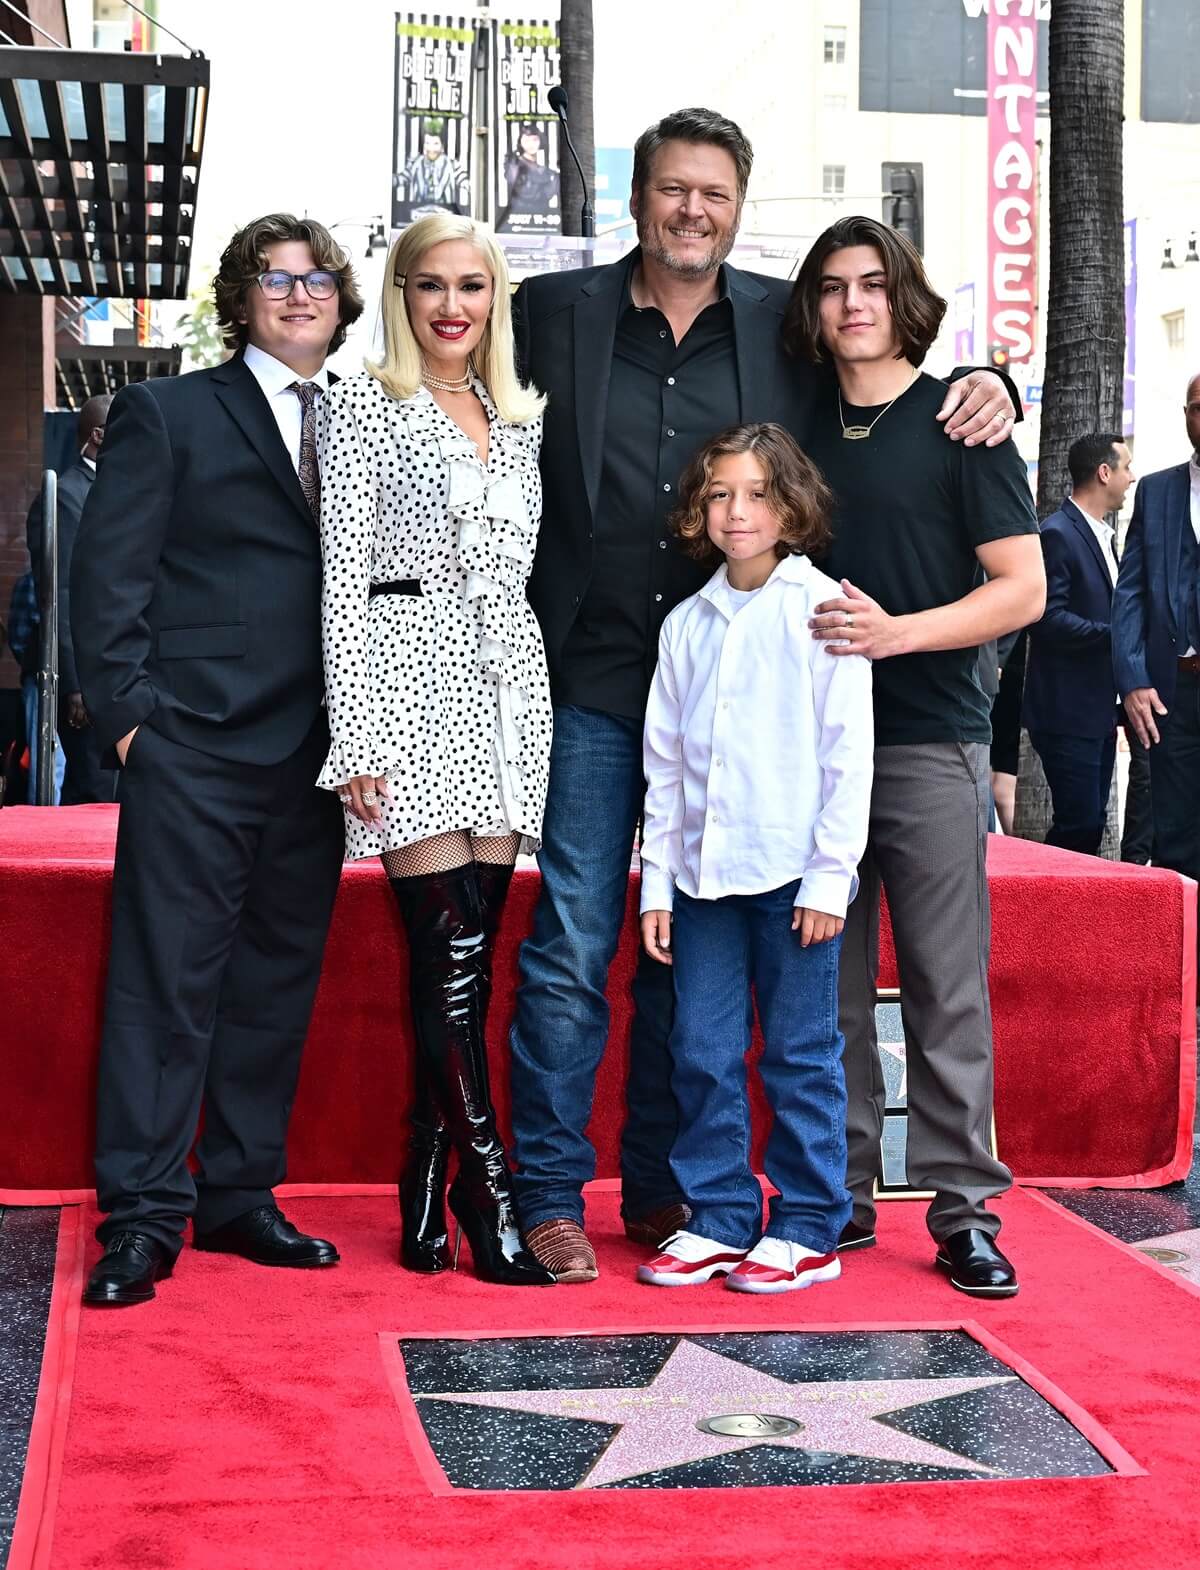 Gwen Stefani posing with her husband Blake Shelton and children at the Hollywood Walk of Fame ceremony.